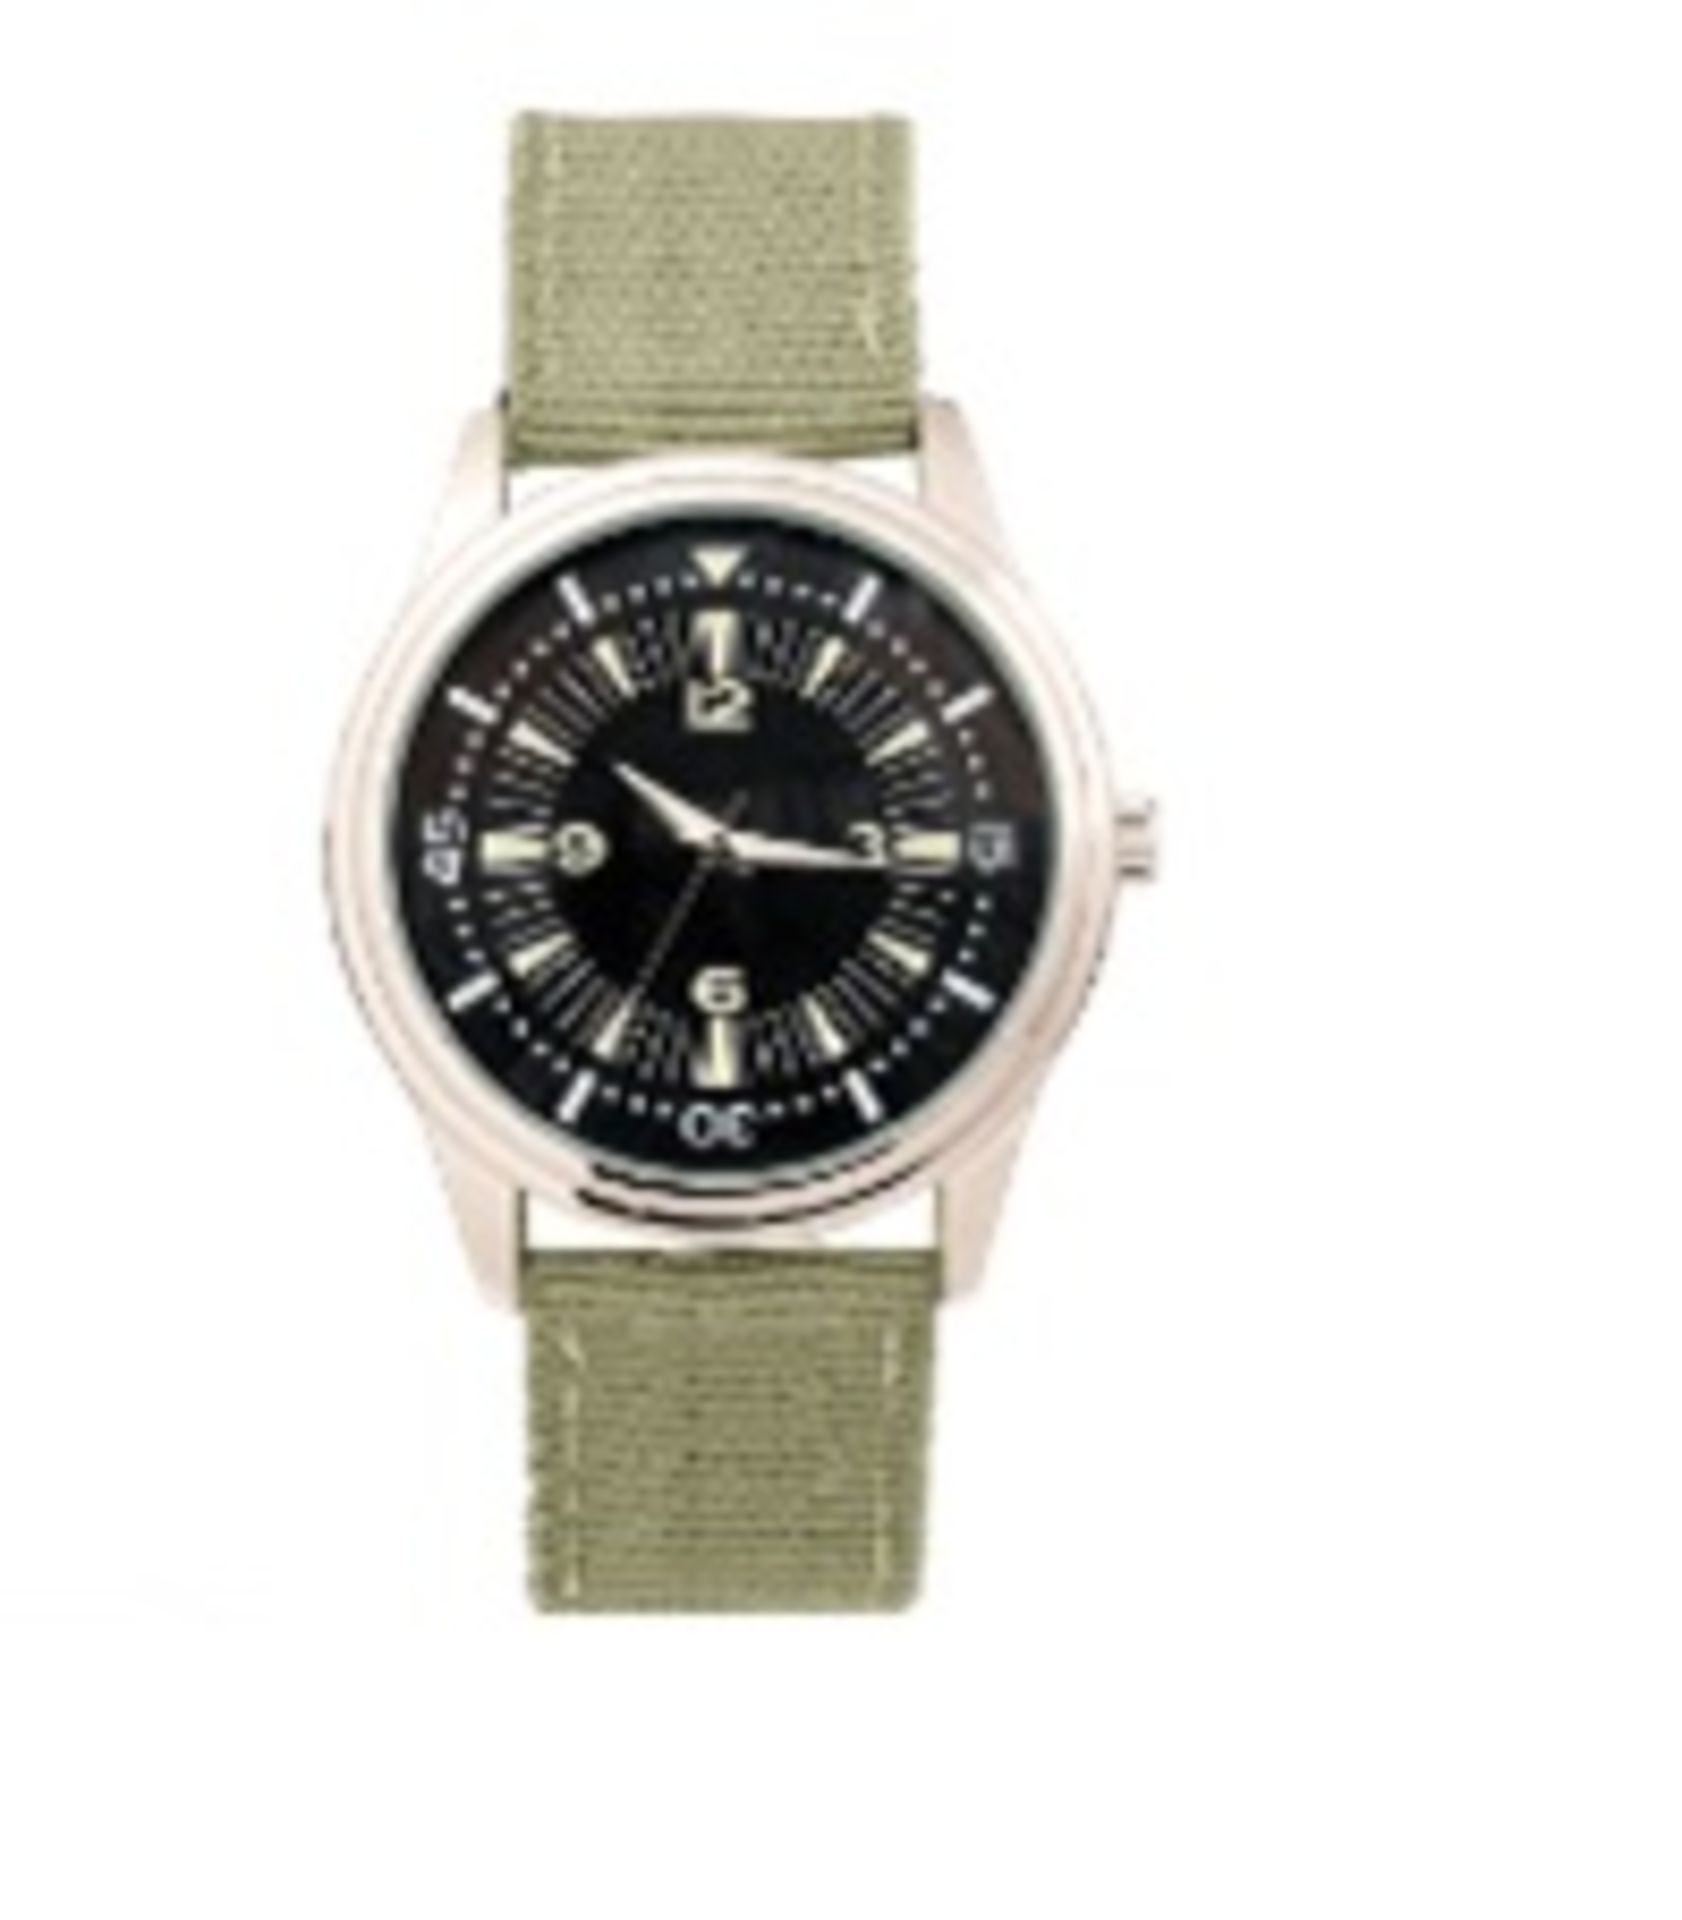 + VAT Brand New Gents 1960s Australian Naval Divers Watch With Engraved Back & Presentation Box